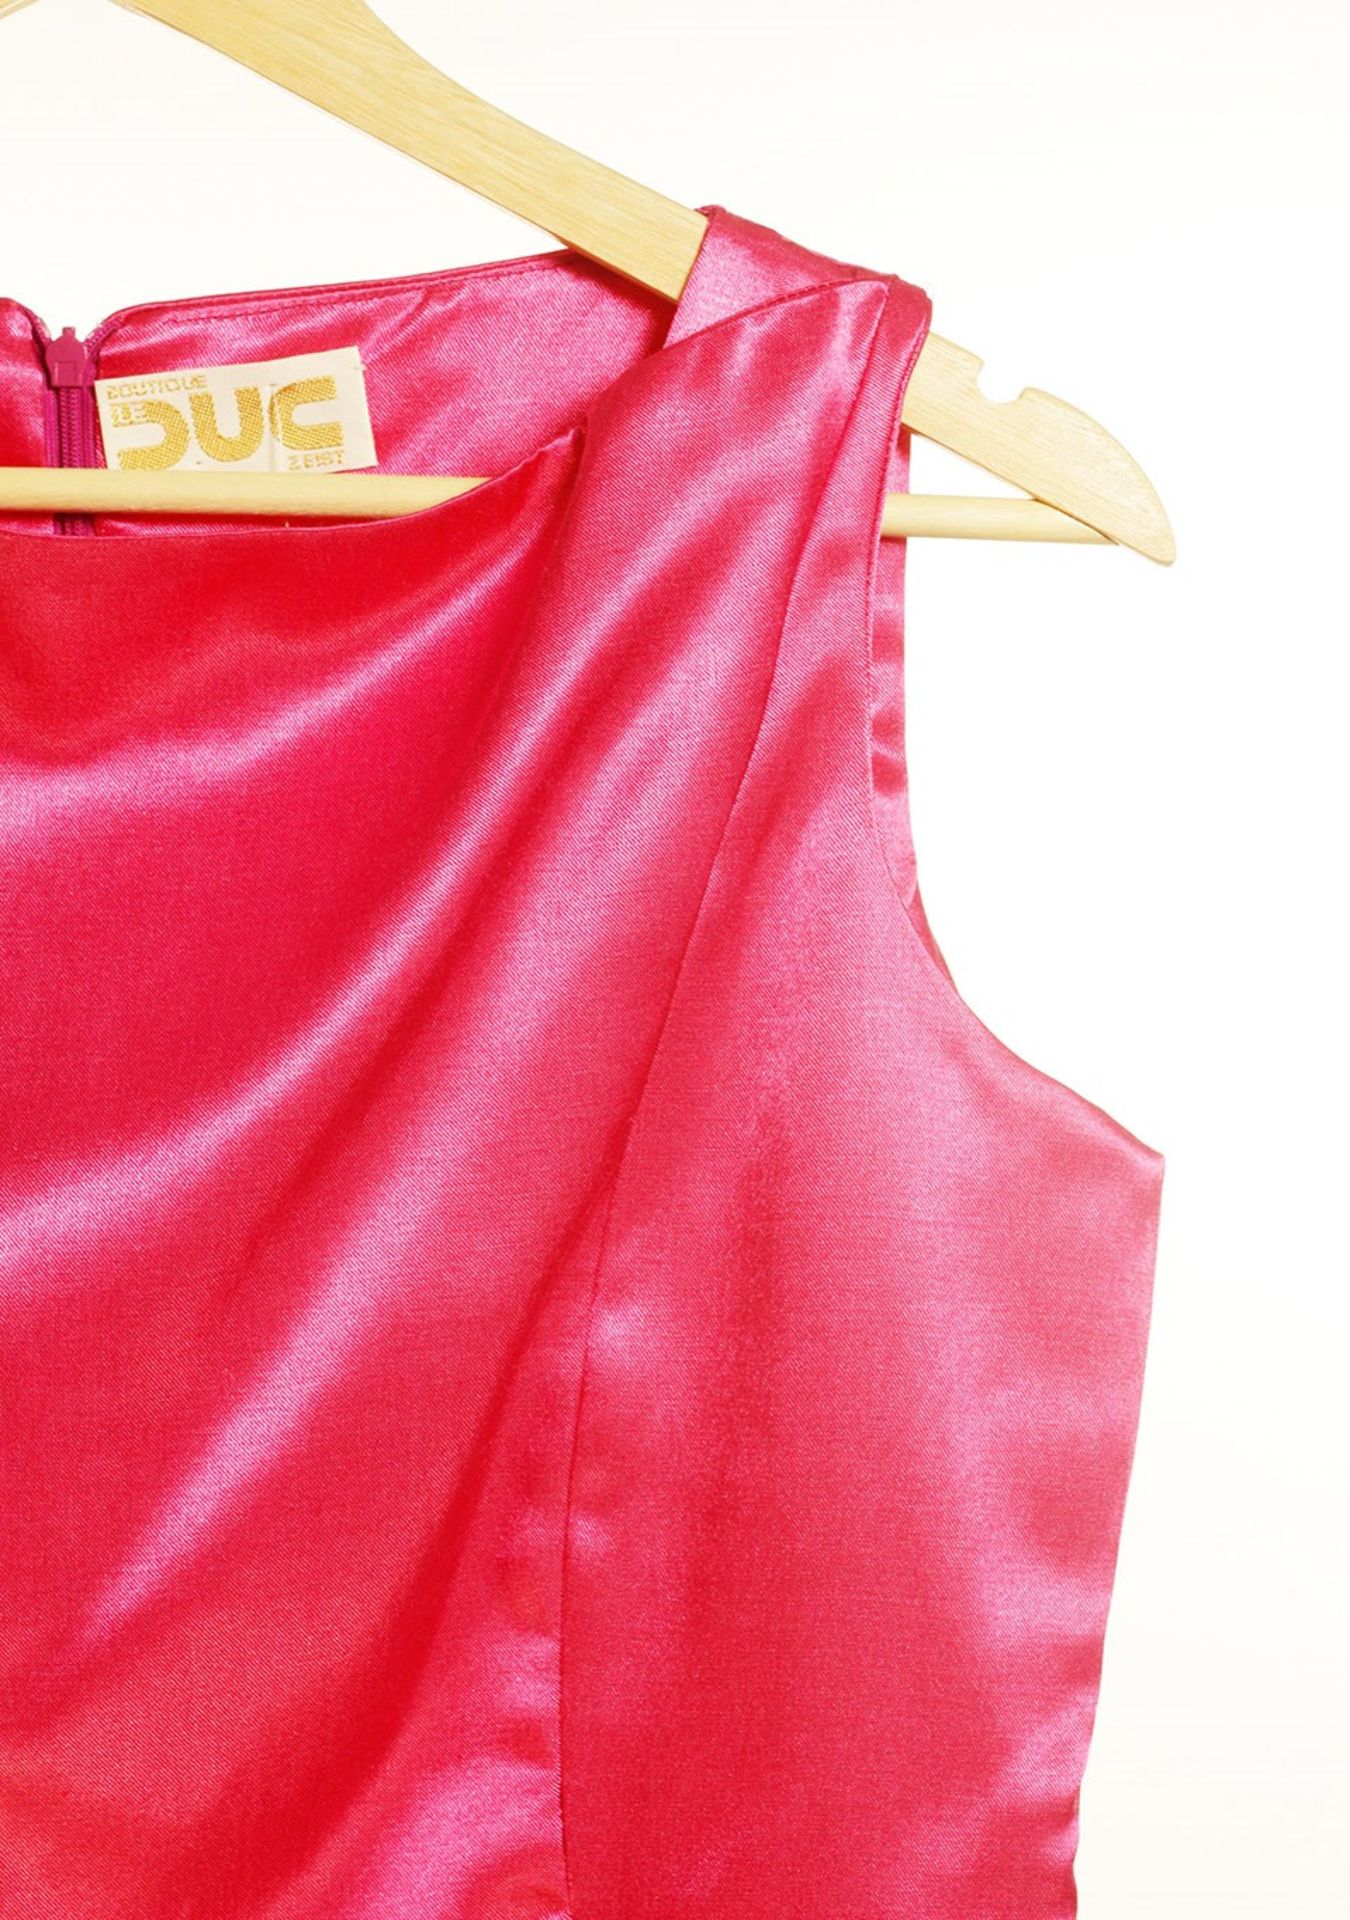 1 x Boutique Le Duc Fuschia Vest - From a High End Clothing Boutique In The - Image 8 of 10